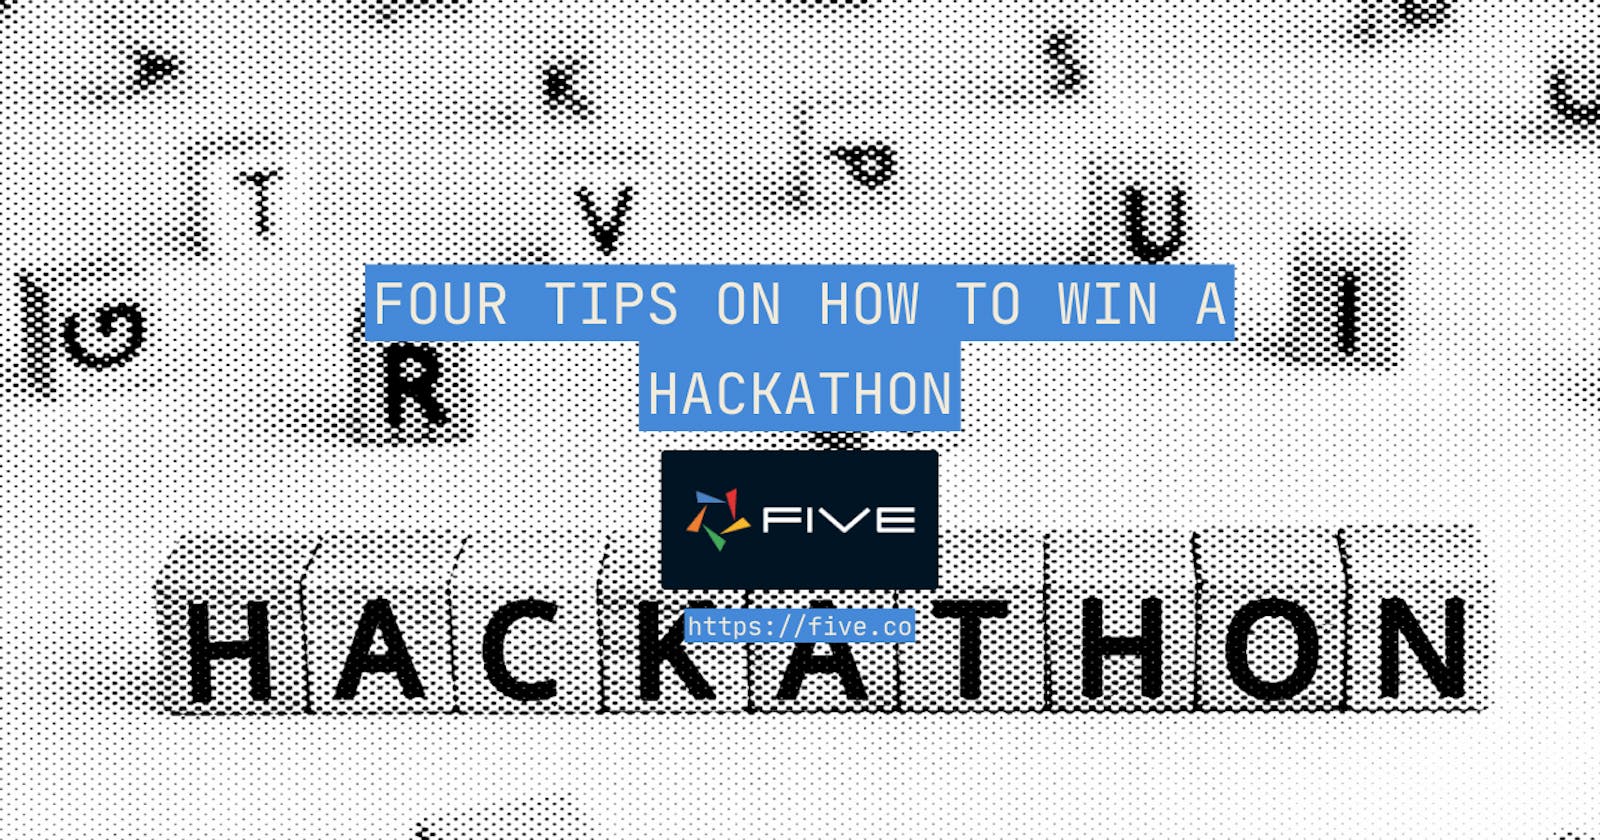 4 Tips on How to Win a Hackathon